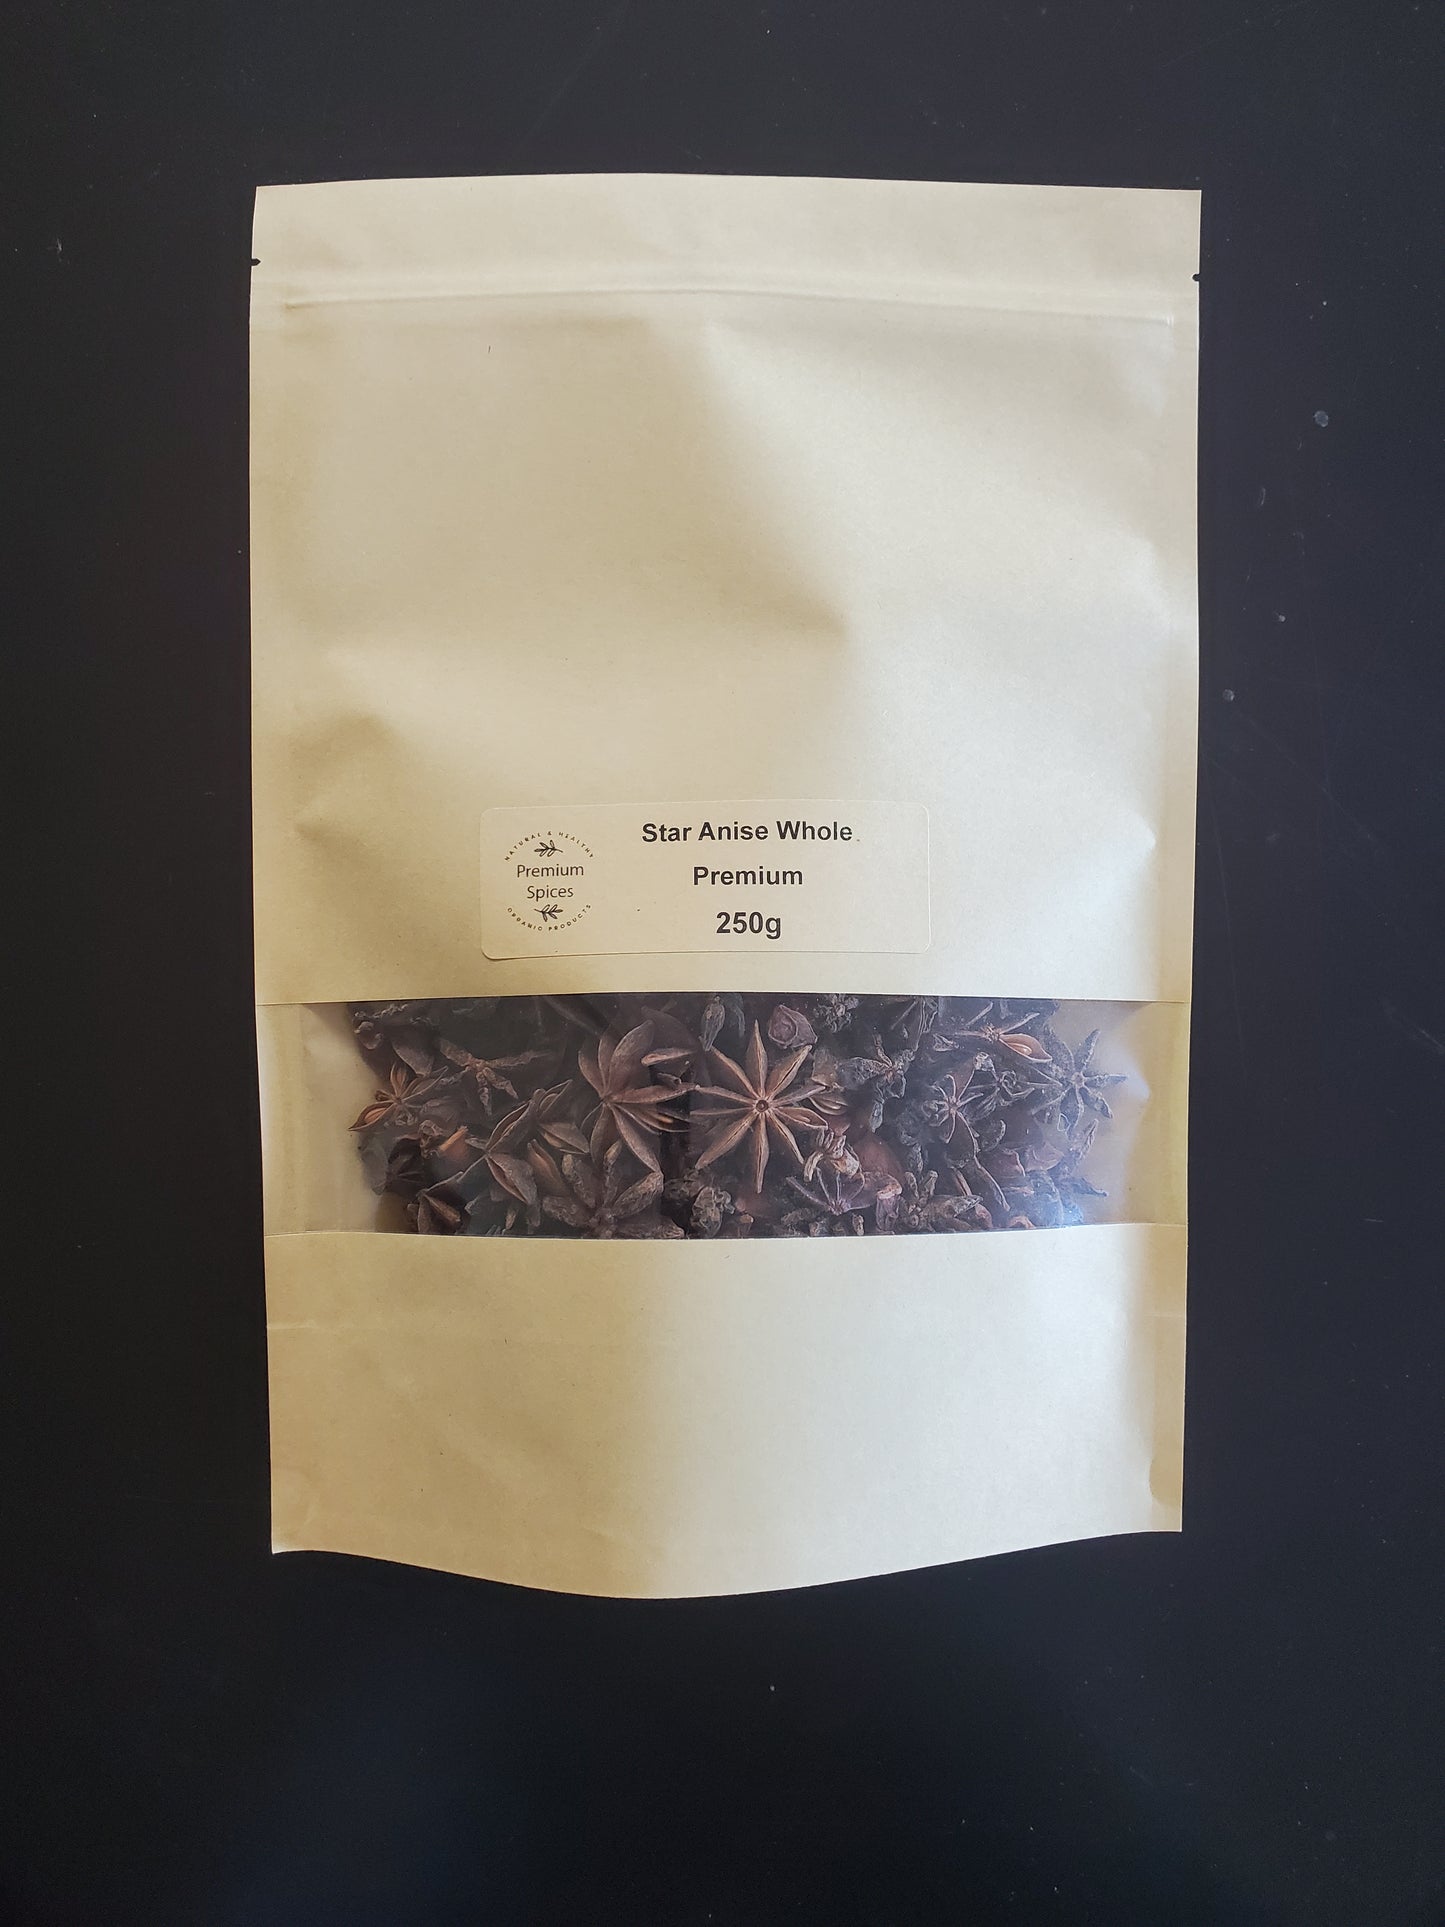 The finest Star Anise and Anise Star in NZ, picture of 250g pack